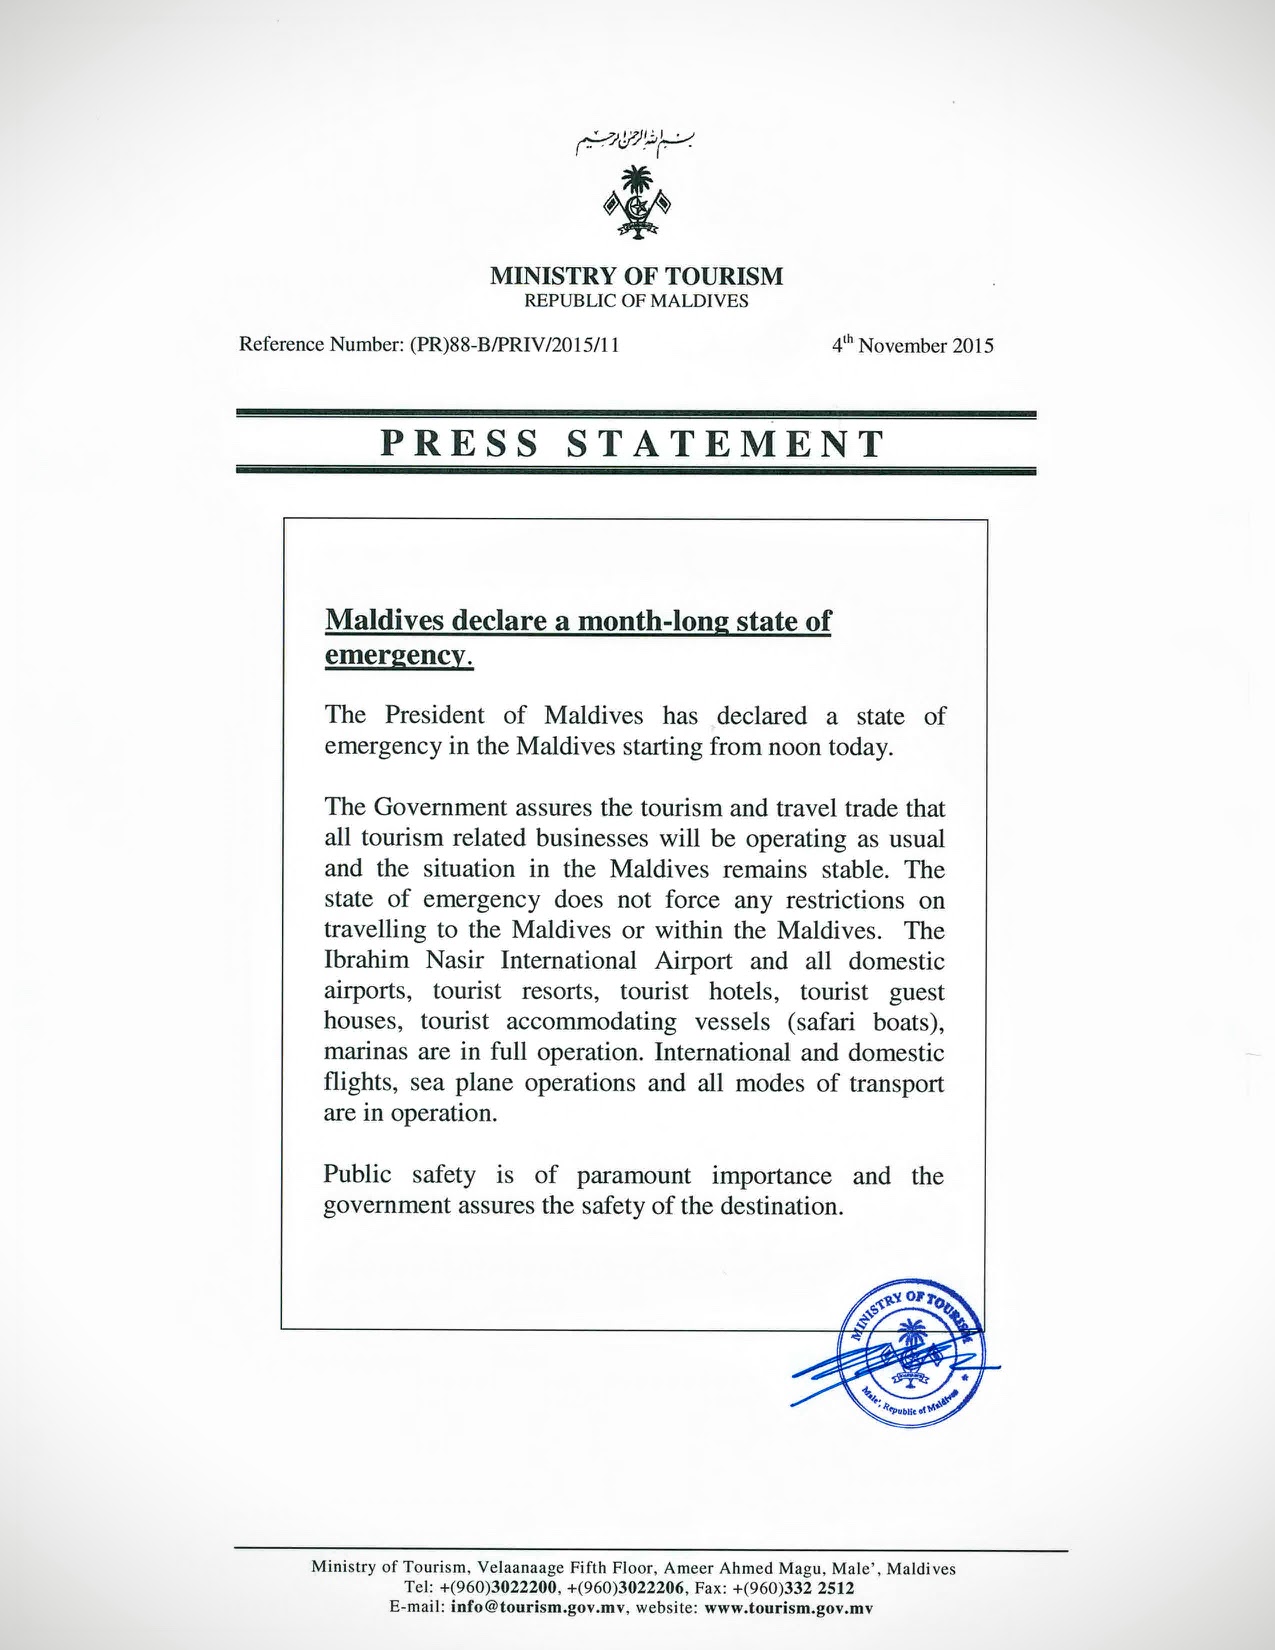 Press Statement from Maldives Ministry of Tourism